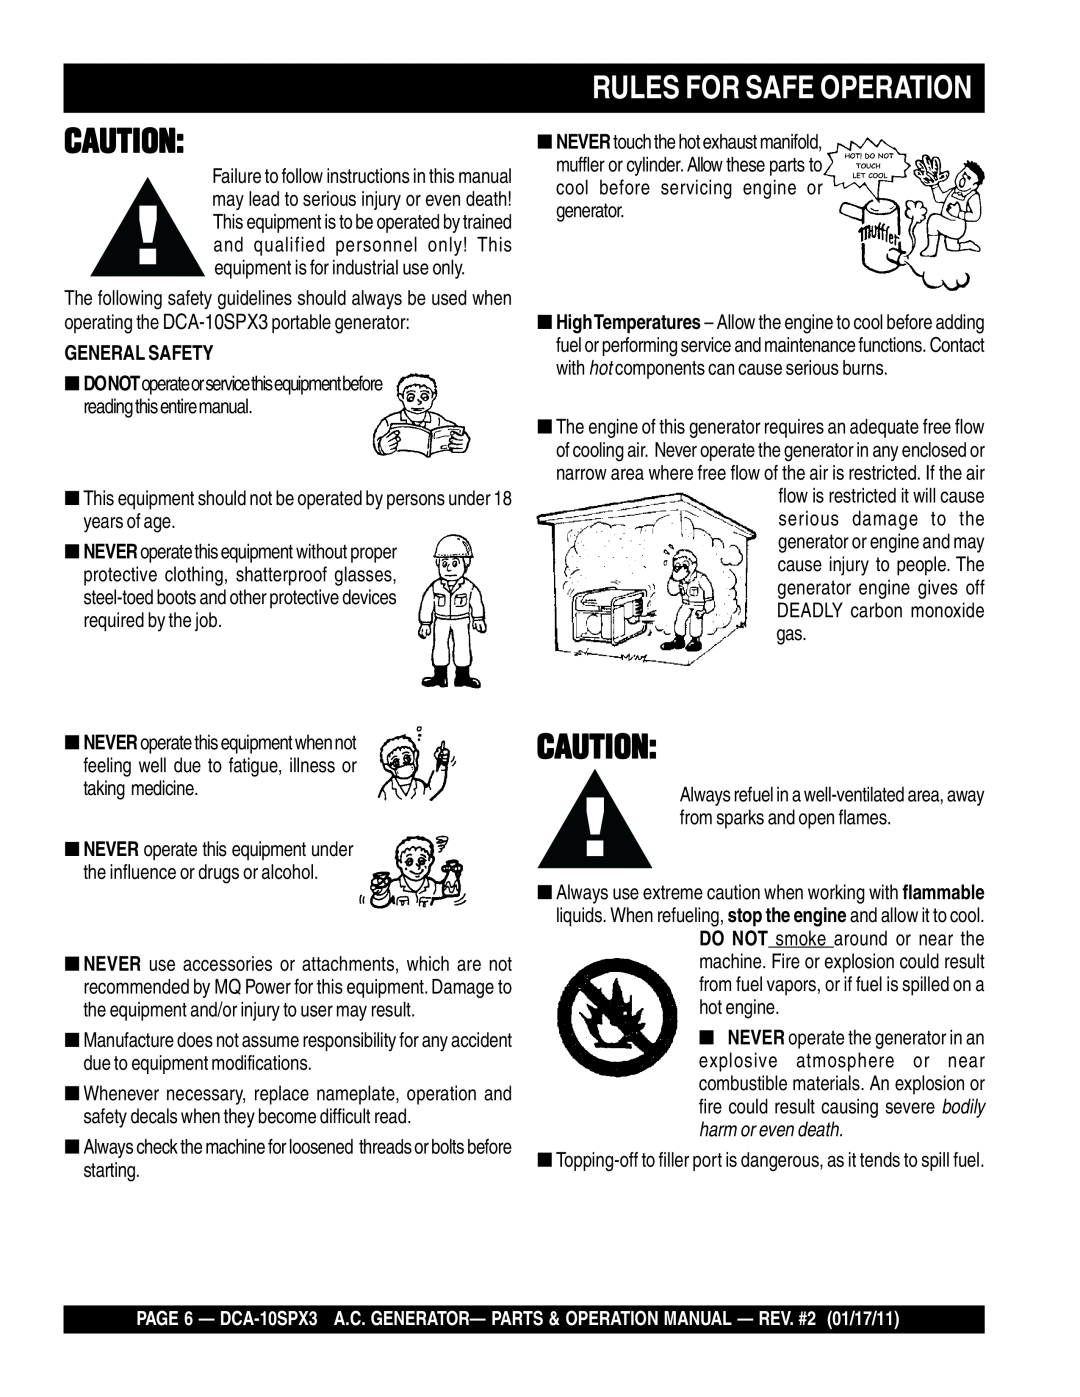 Multiquip DCA10SPX3 manual Rules For Safe Operation, General Safety 